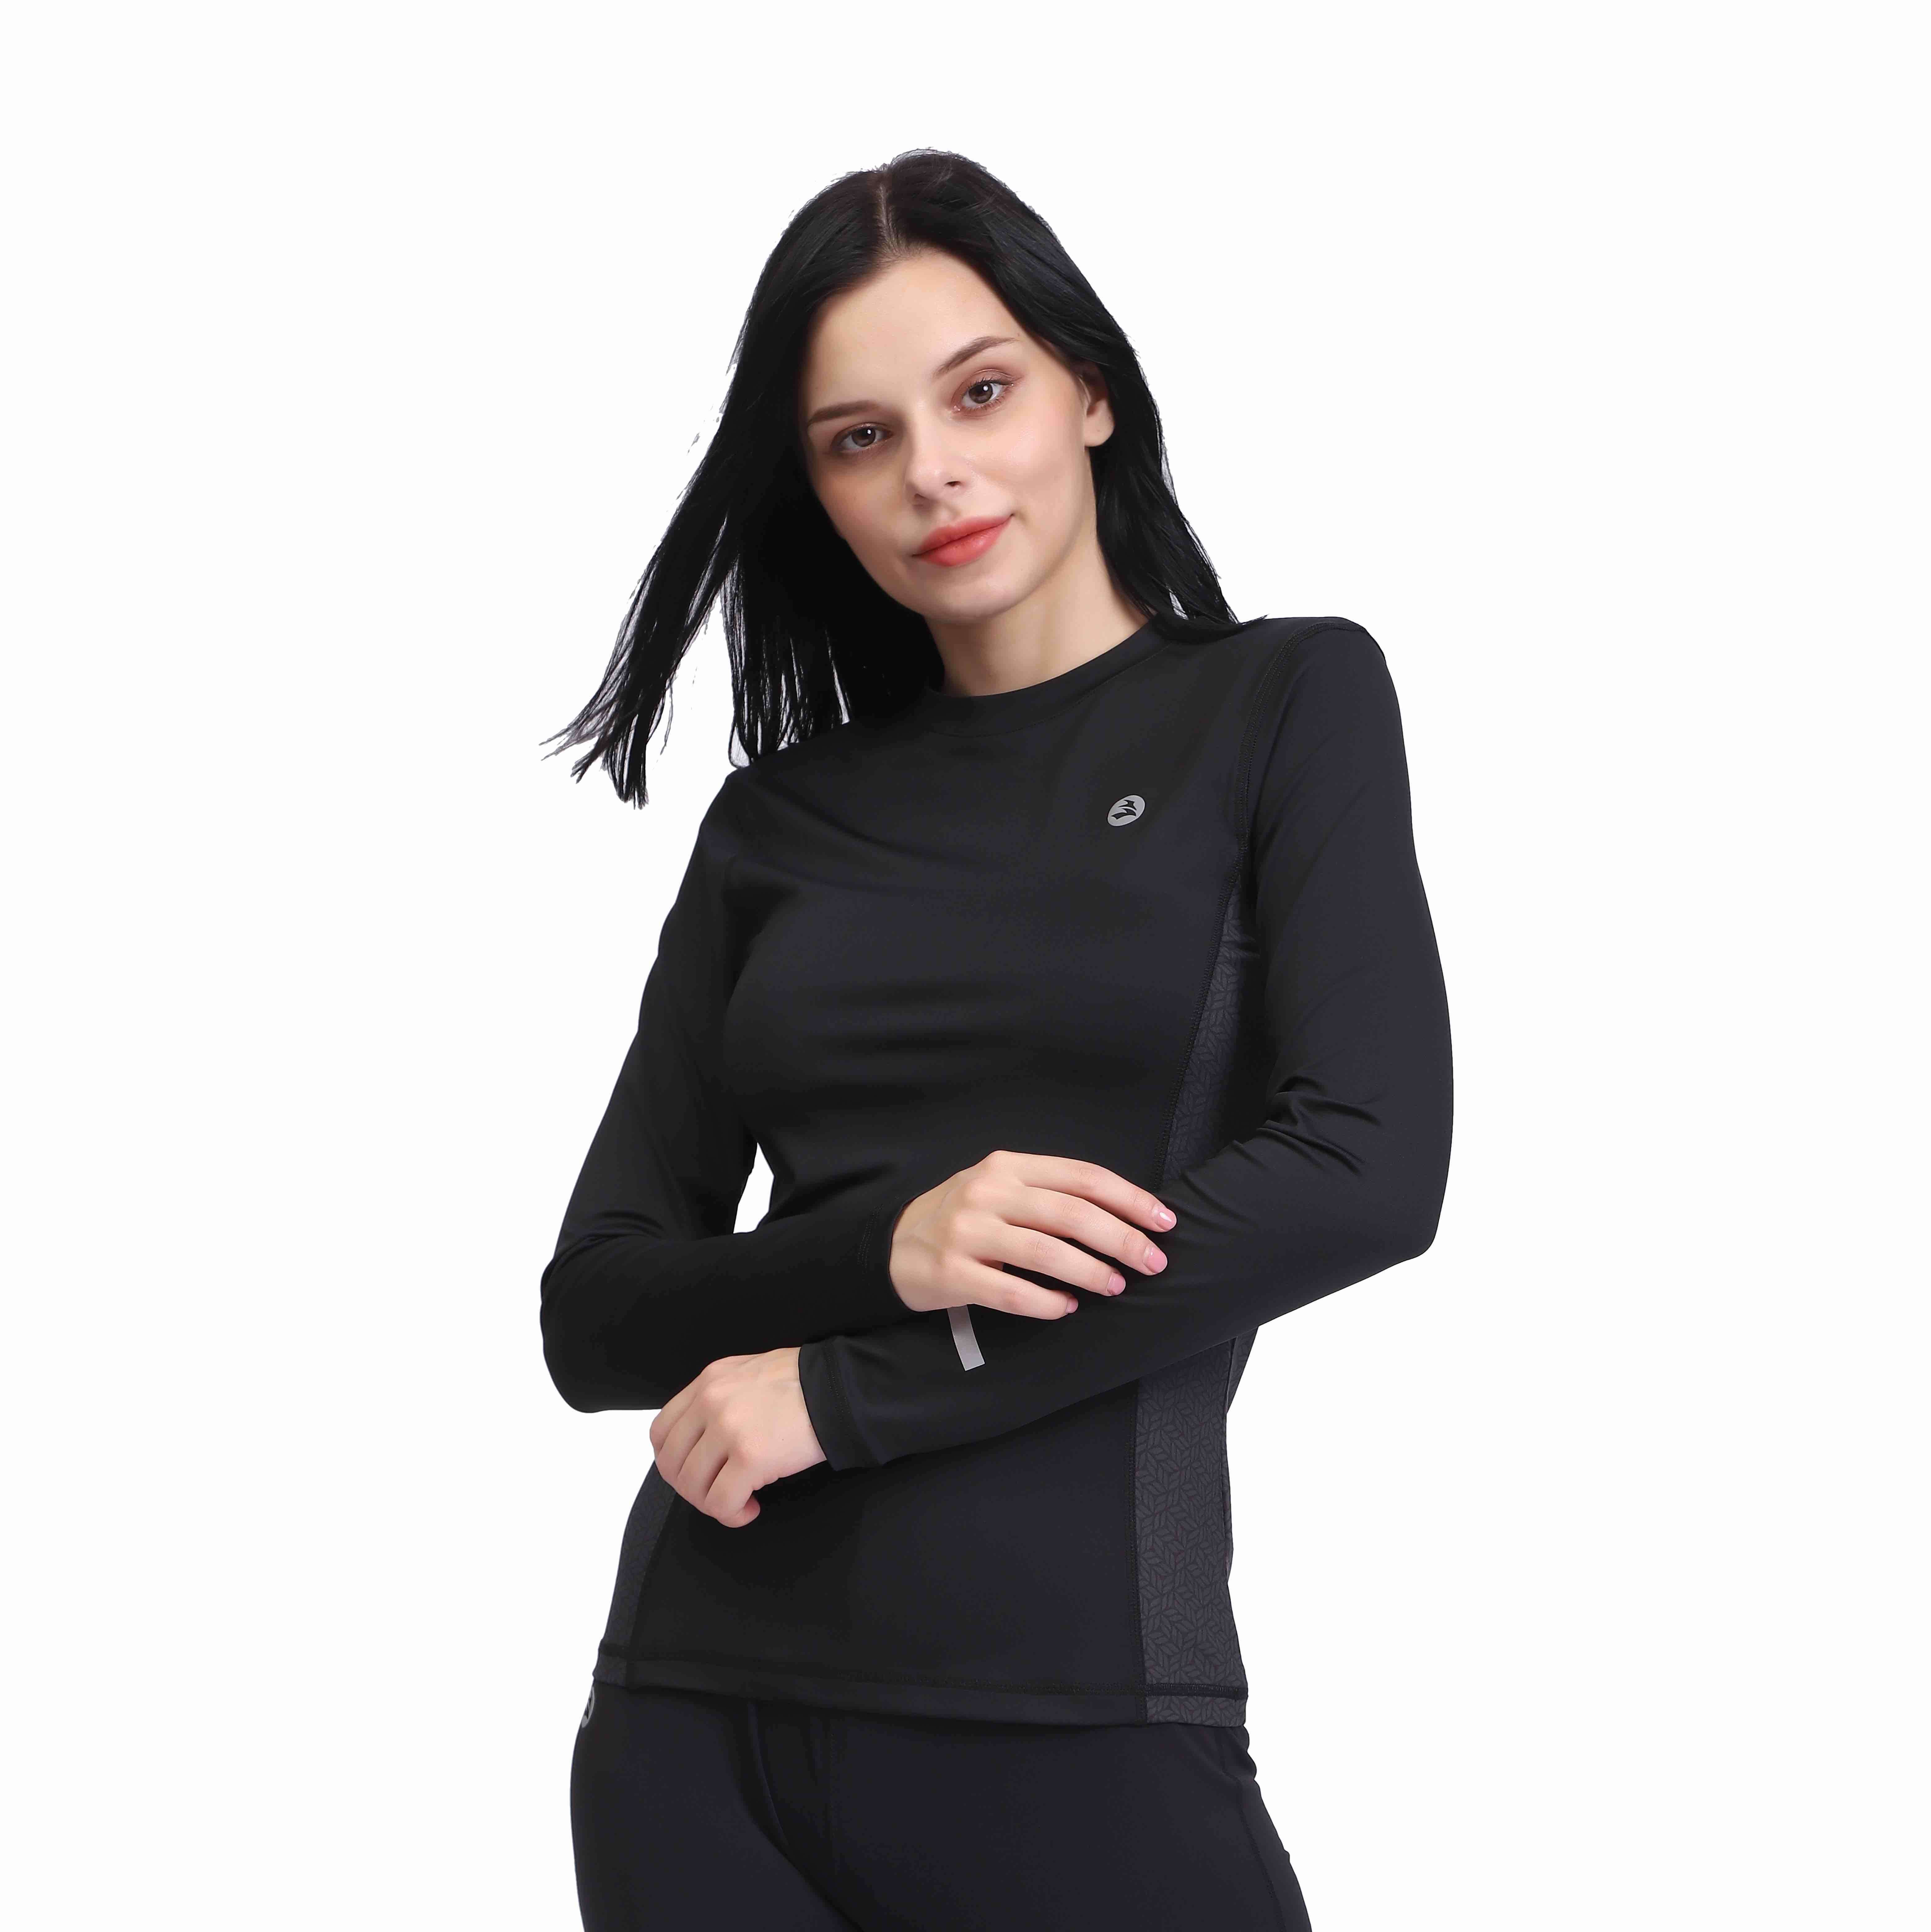 Black Cowl Neck Compression Baselayer Long Sleeve Top for Women